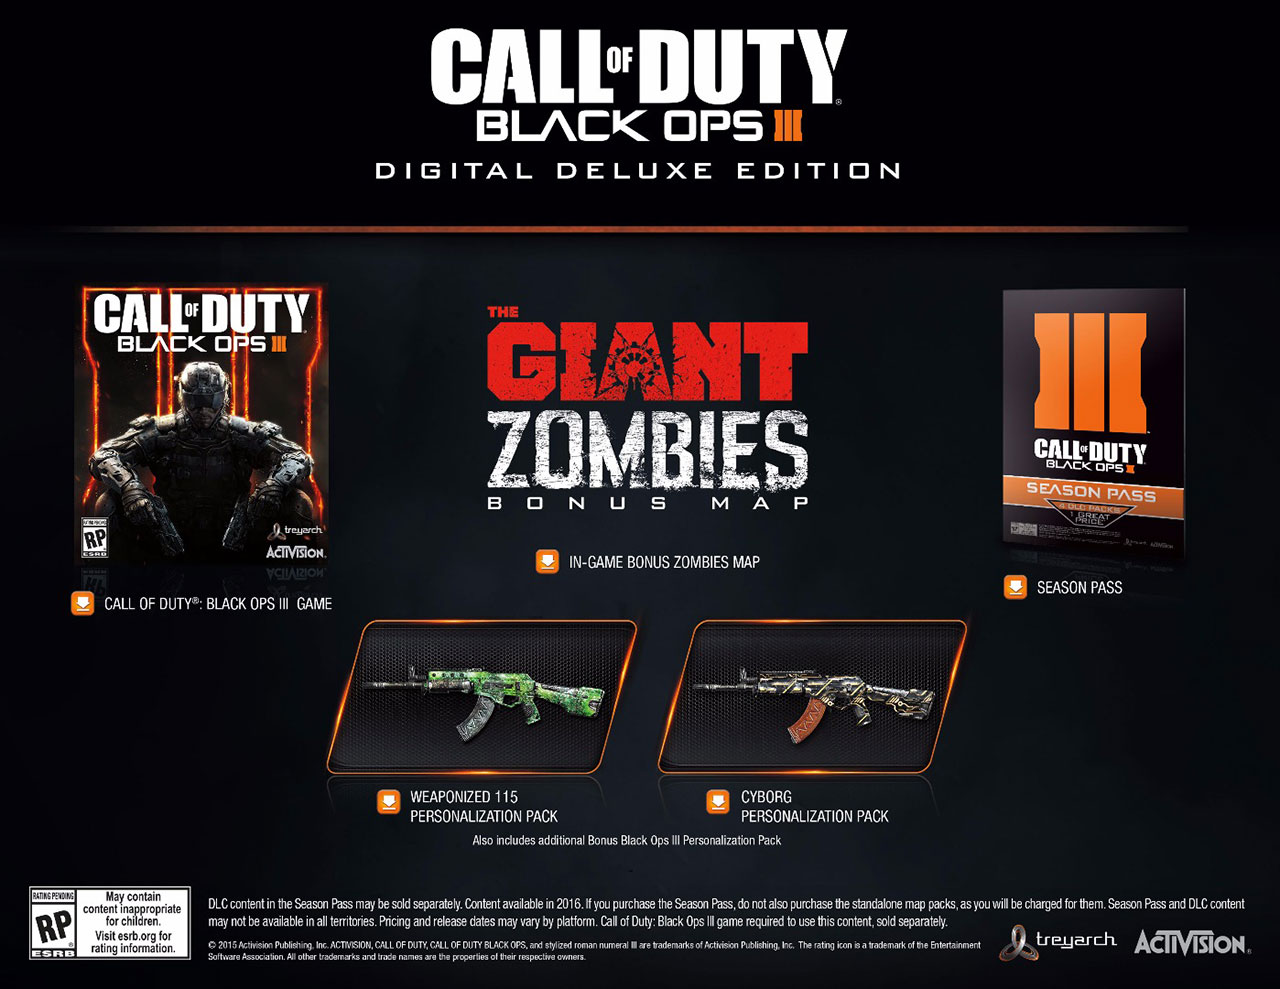 steam black ops 3 zombies deluxe